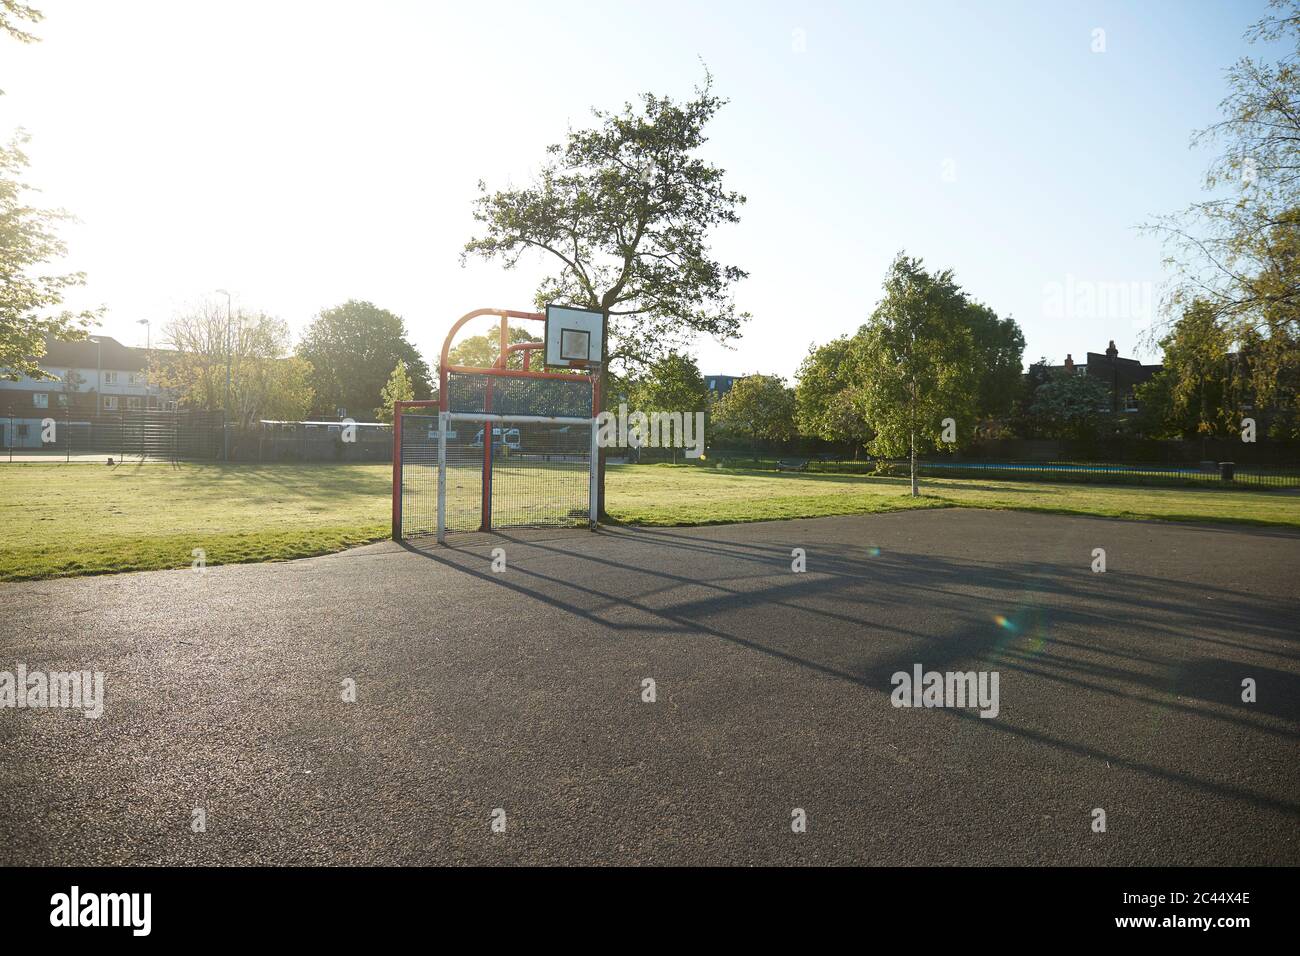 UK, England, London, Empty basketball court in Colliers Wood Stock Photo